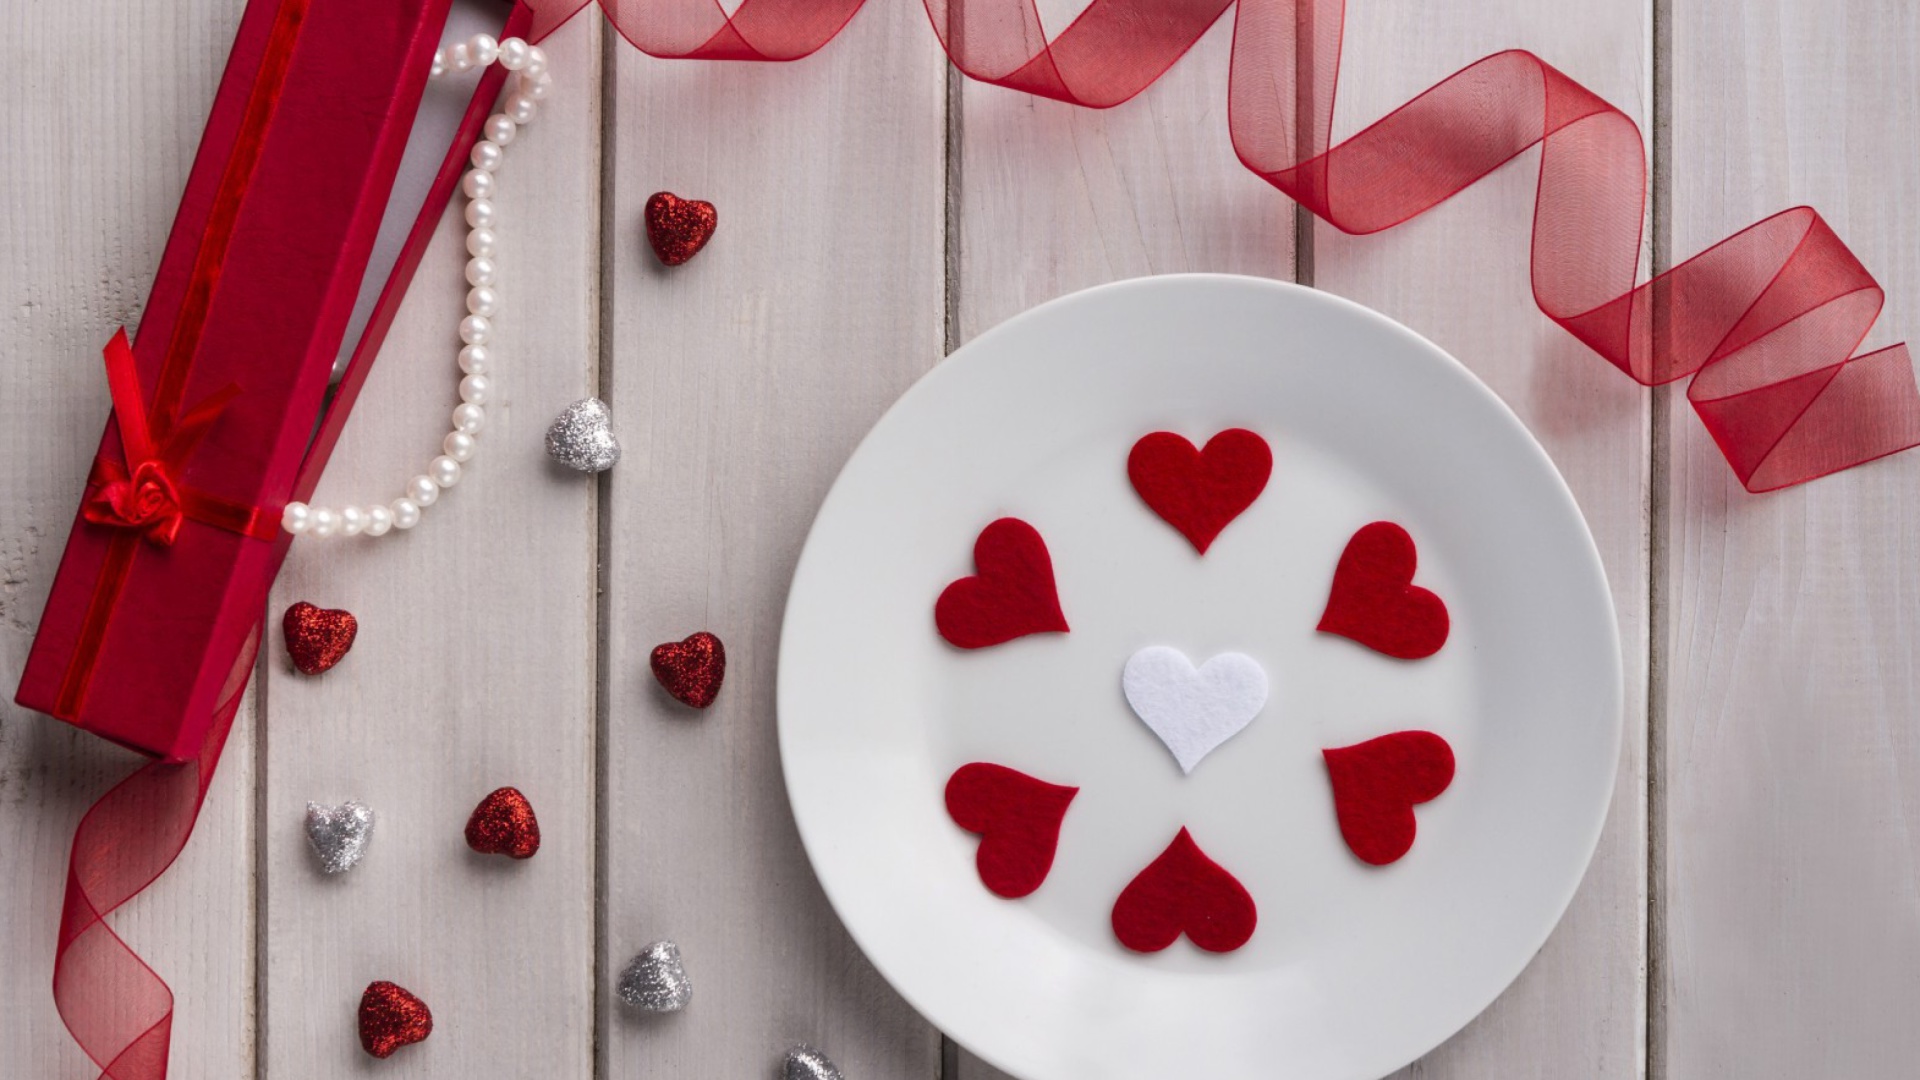 Romantic Valentines Day Table Settings wallpaper 1920x1080